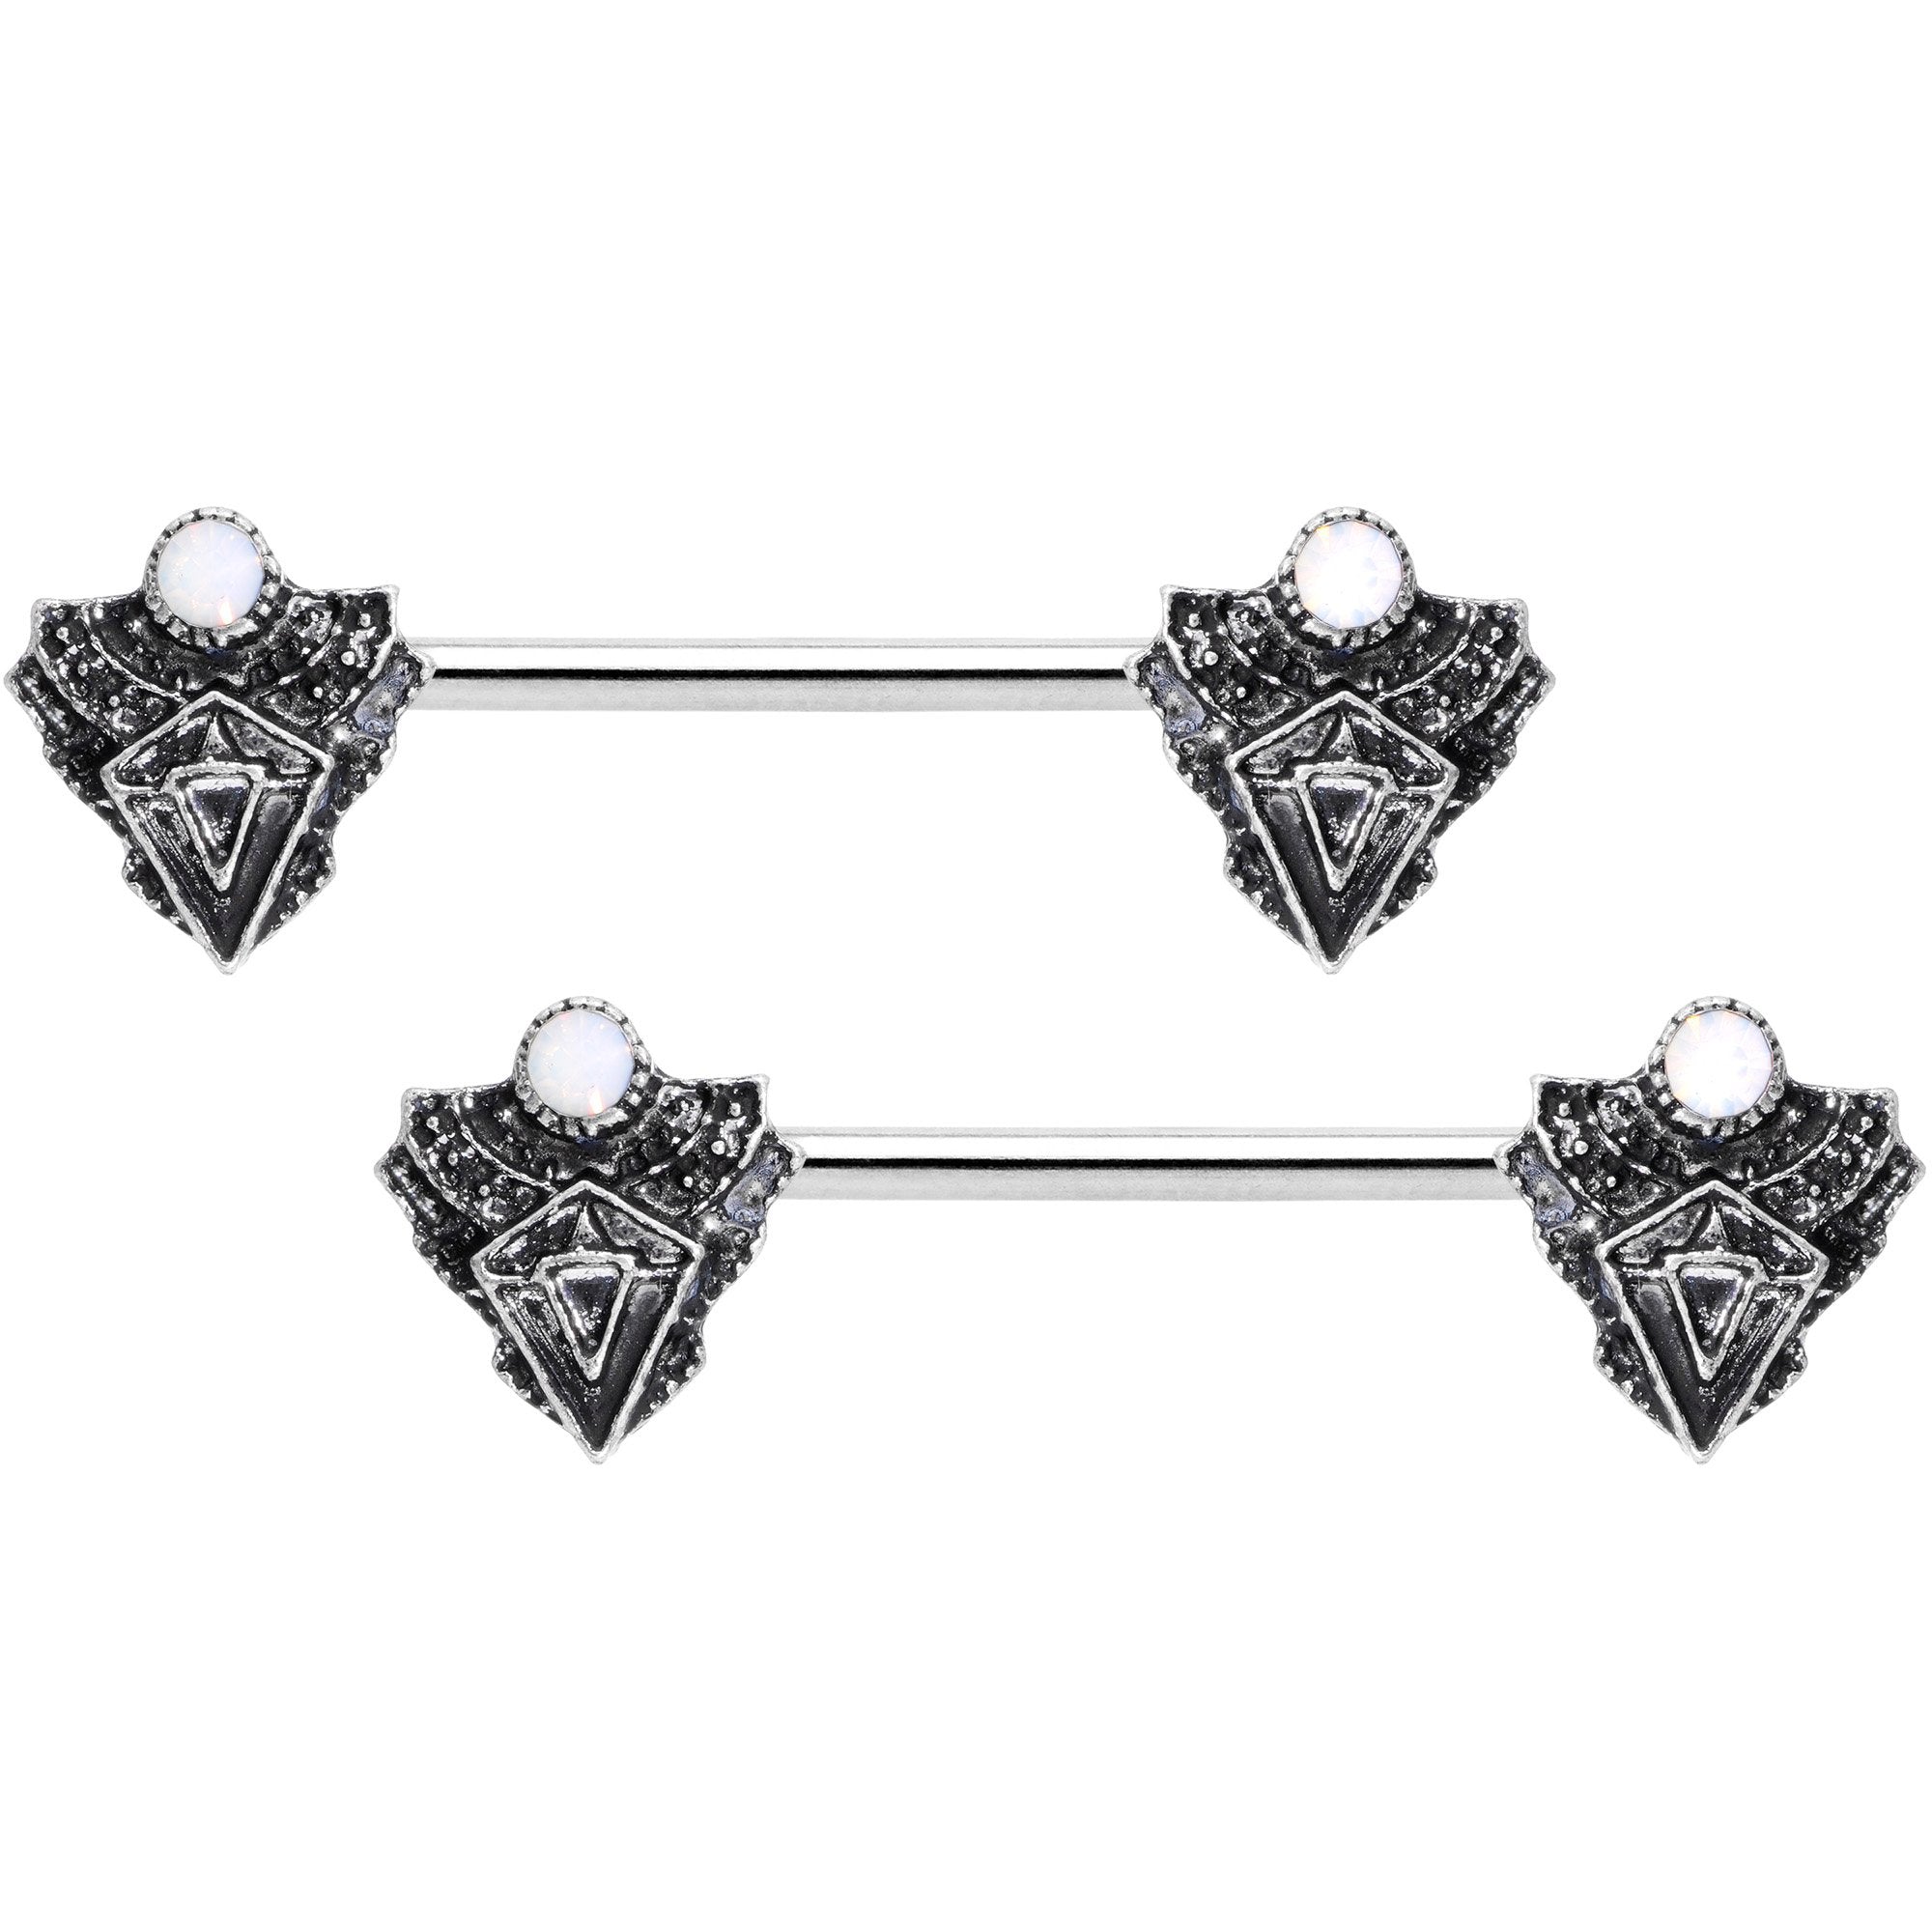 14 Gauge 9/16 White Faux Opal Retro Triangle Barbell Nipple Ring Set